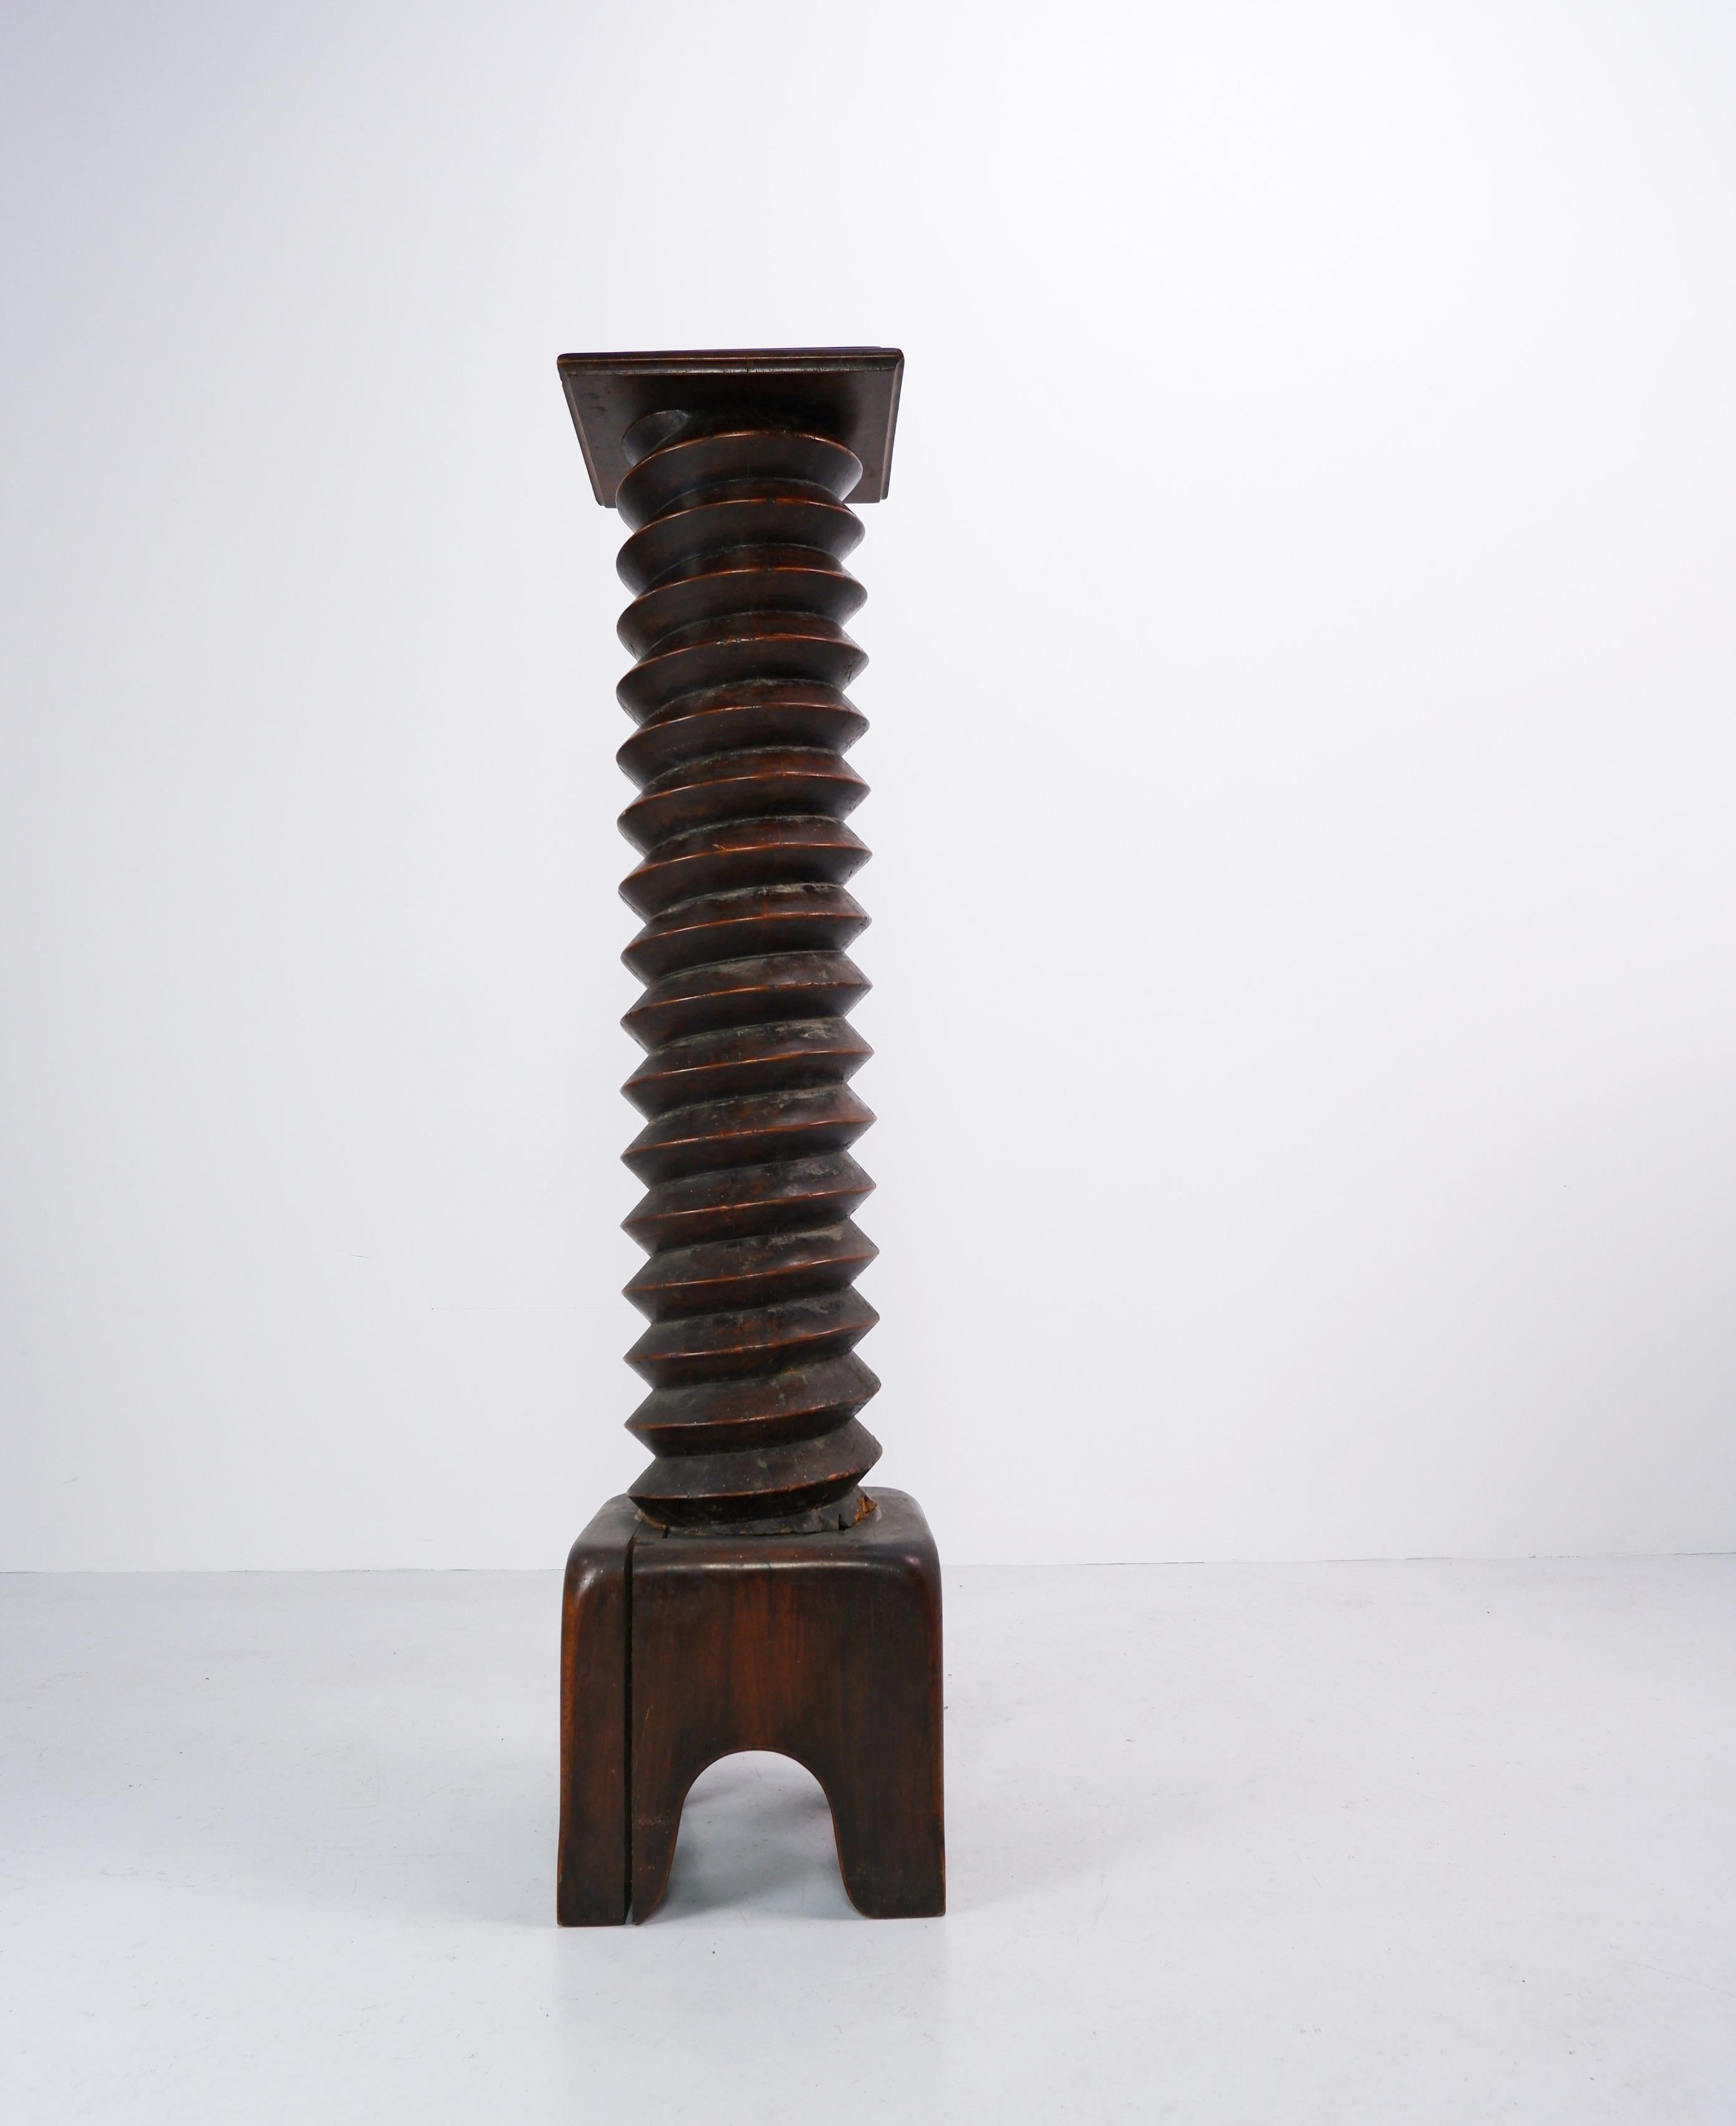 Impressive early 20th century turned oak pedestal in the manner of Charles Dudouyt. 

Dimensions (cm, approx):
Height: 130
Width: 31.5
Depth: 31.5.